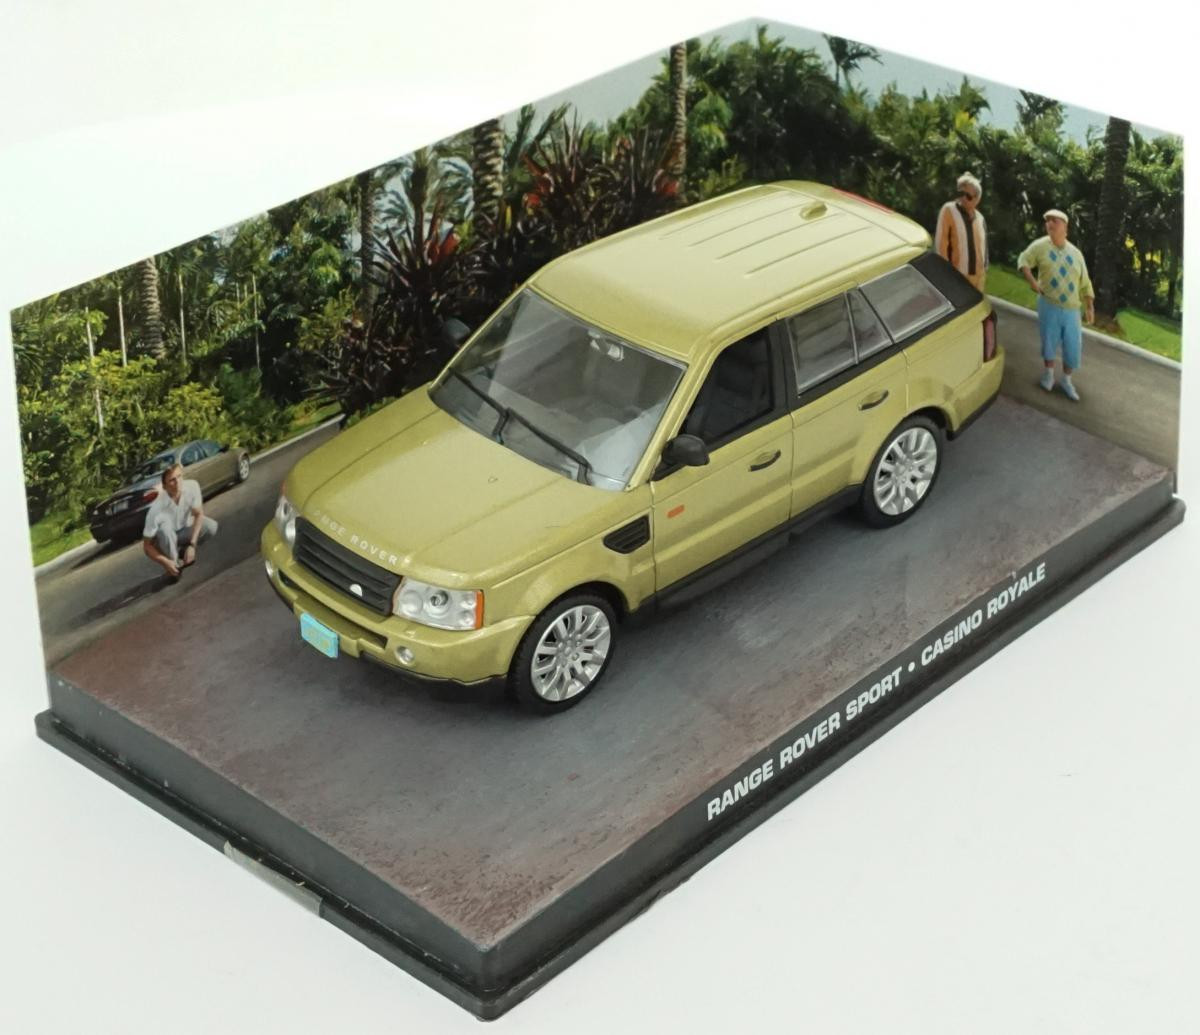 Details about   1/43 JAMES BOND 007 RANGE ROVER SPORT FROM CASINO ROYALE IN METALLIC GOLD 